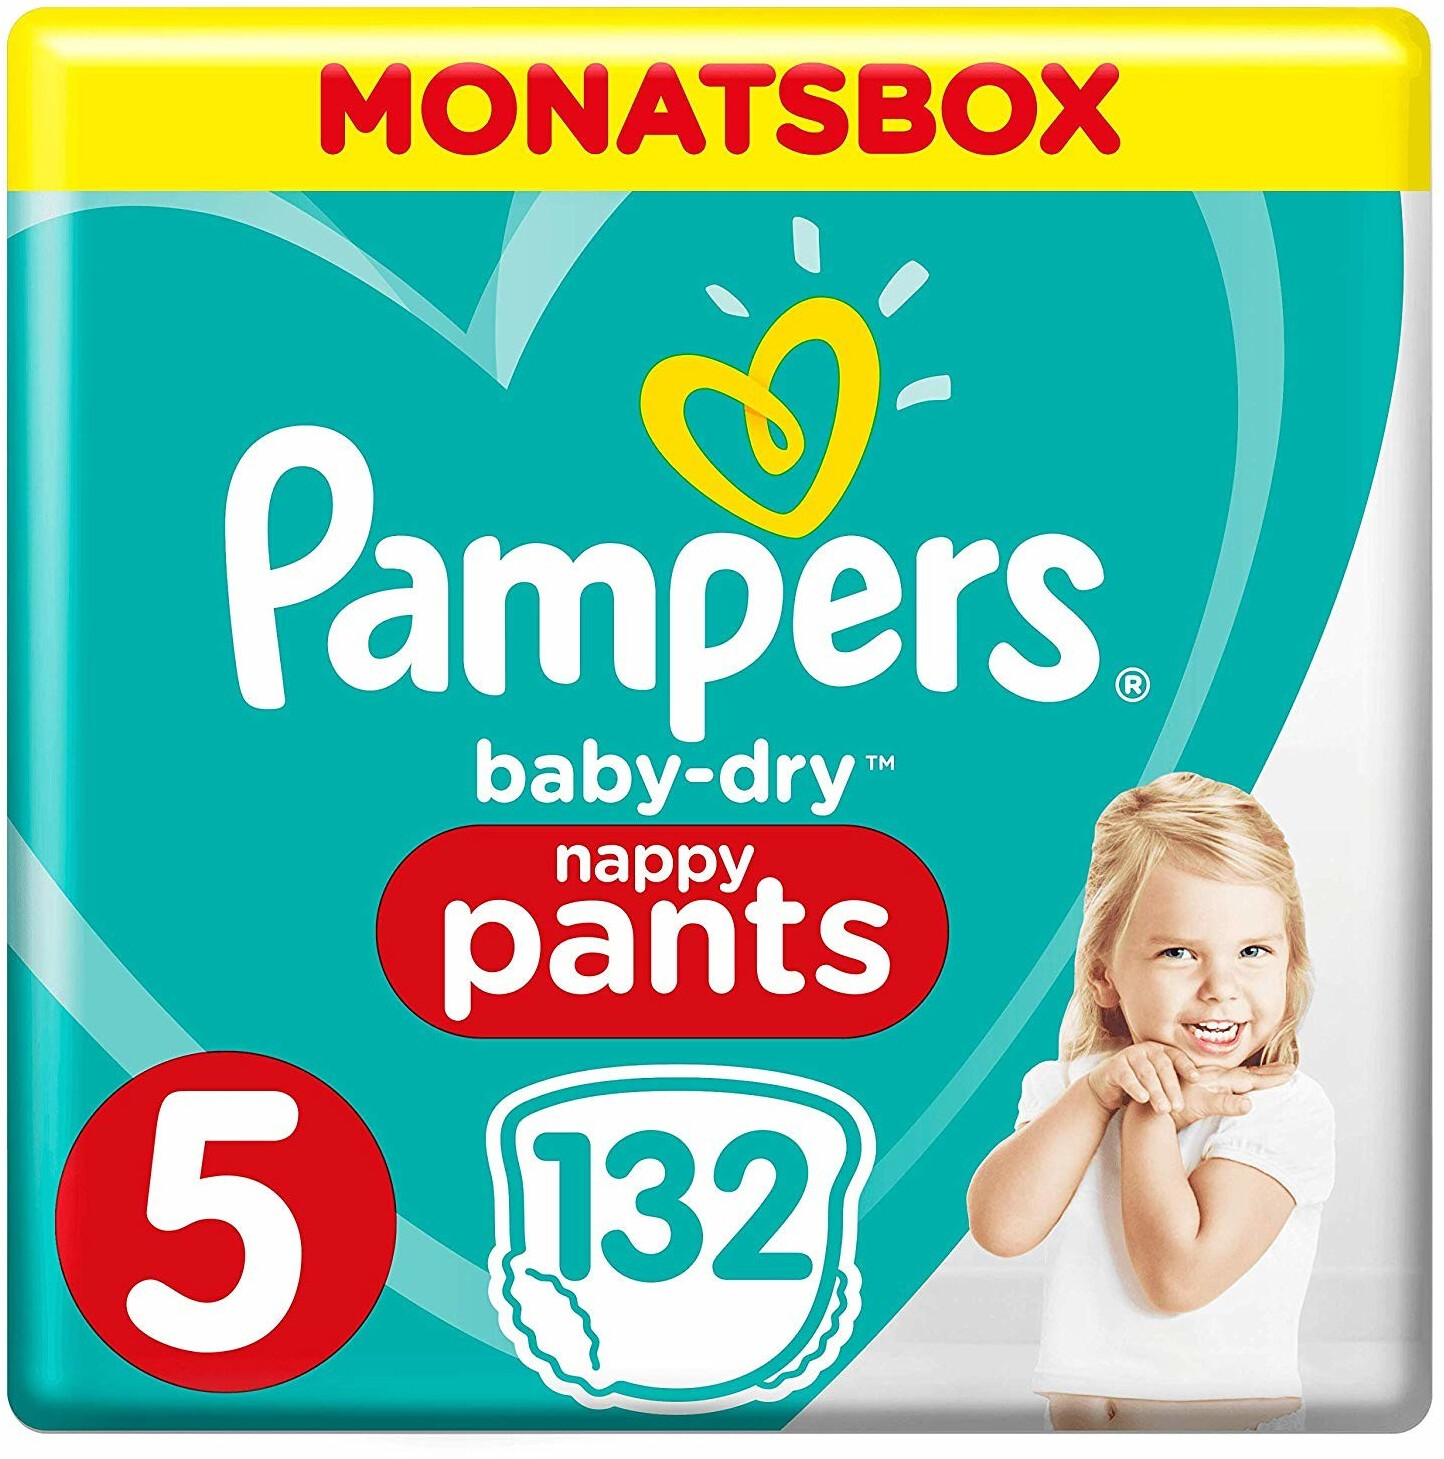 Baby-dry - pants - taille 5 12-17 kg - couches-culottes Pampers